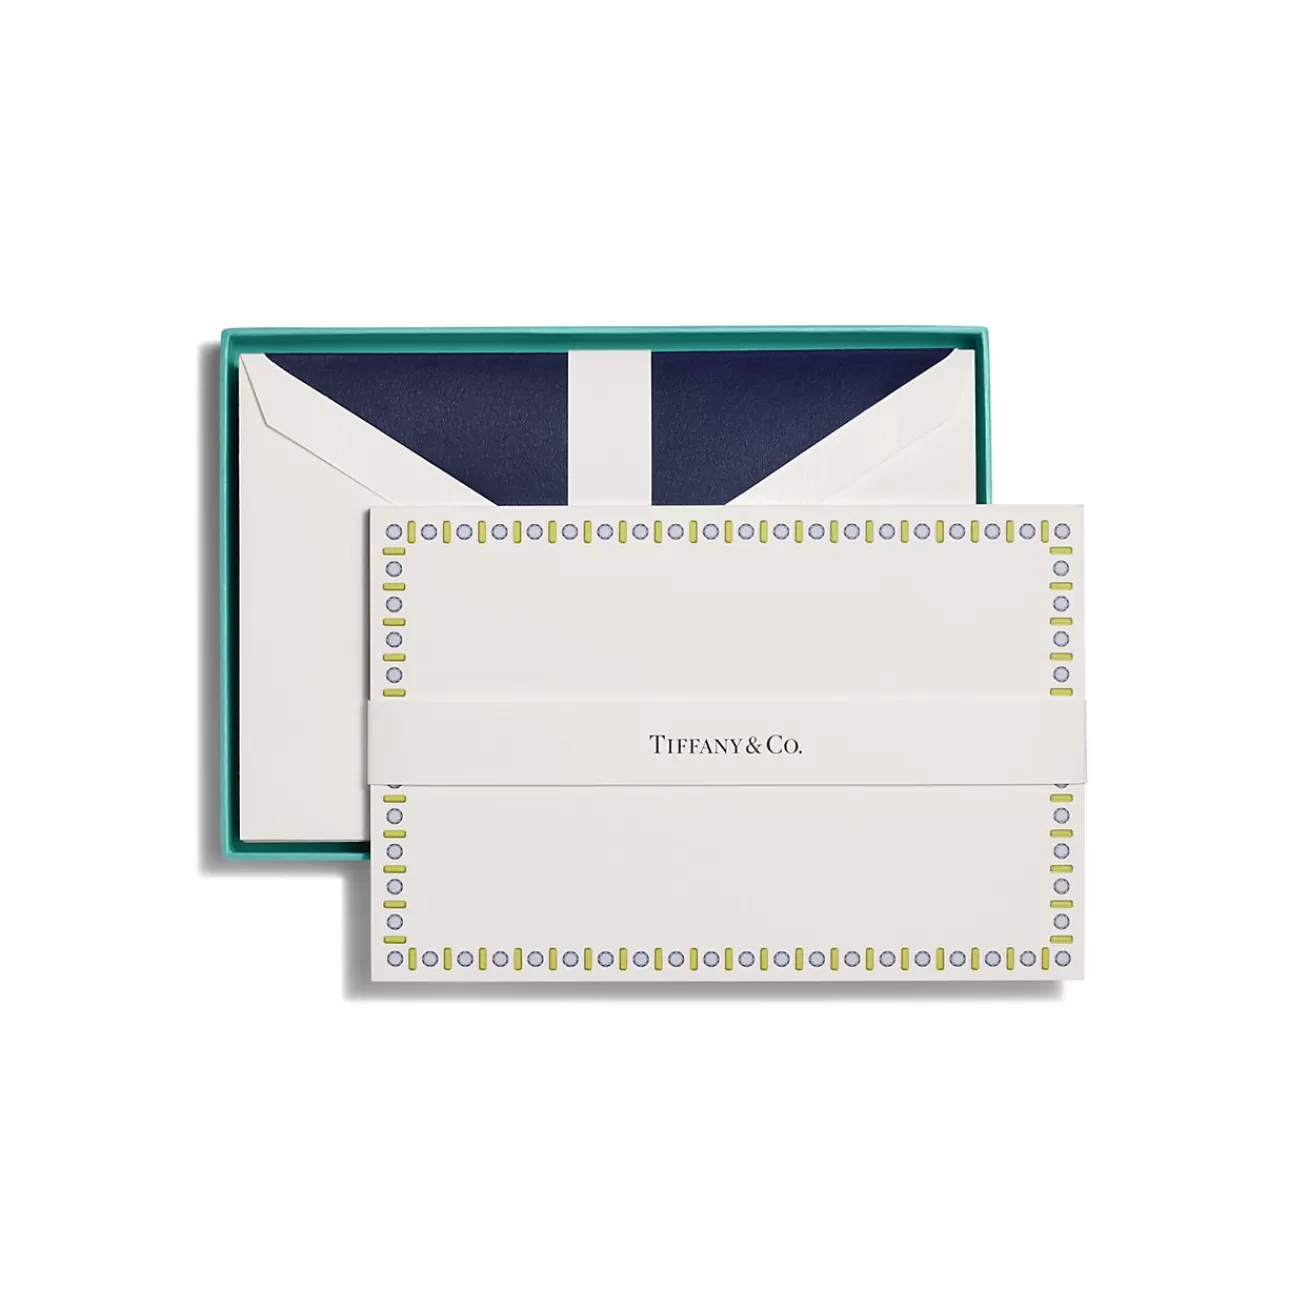 Tiffany & Co. Tiffany Facets Notecards Set of 12, in Jade-colored Paper | ^ Business Gifts | Stationery, Games & Unique Objects